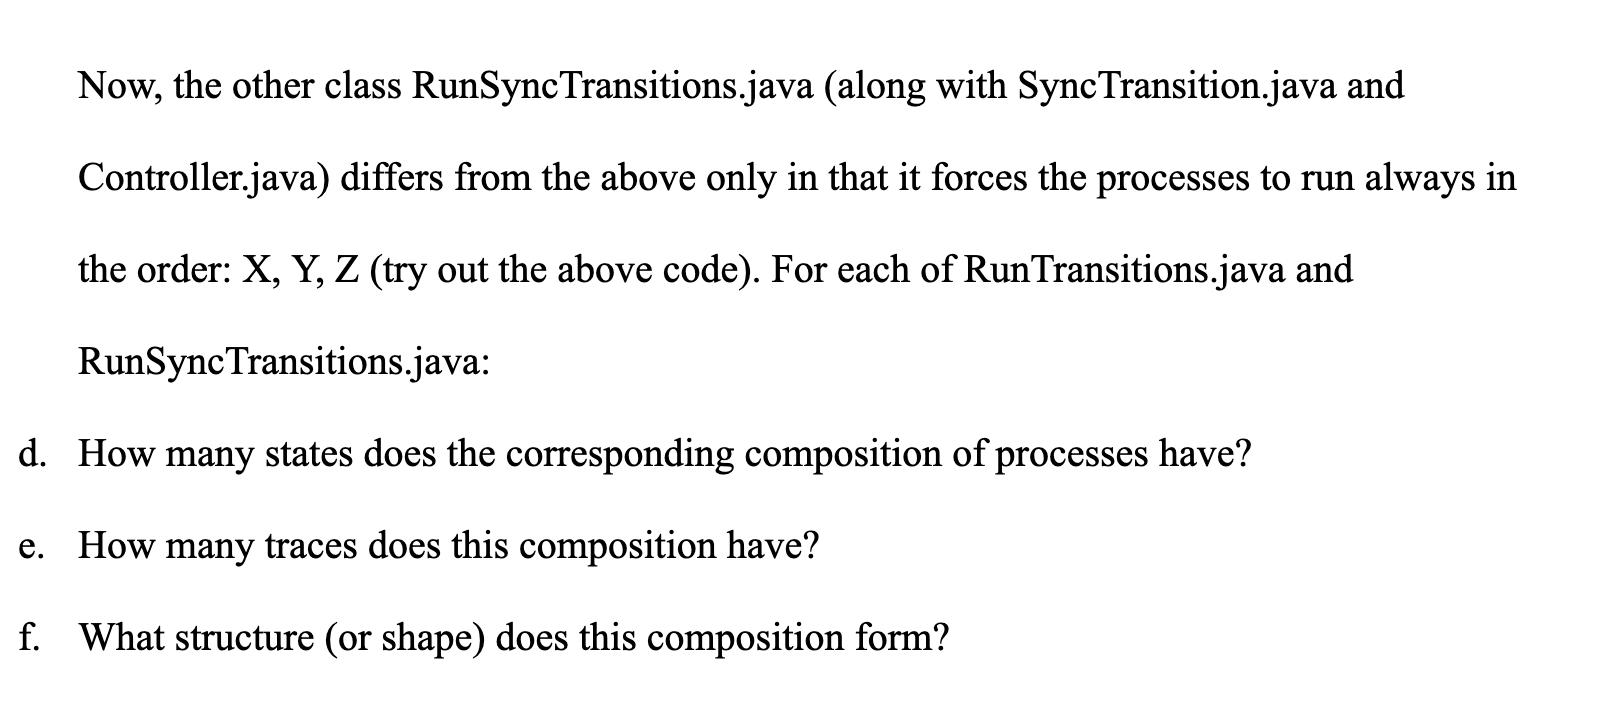 Now, the other class RunSync Transitions.java (along with Sync Transition.java and Controller.java) differs